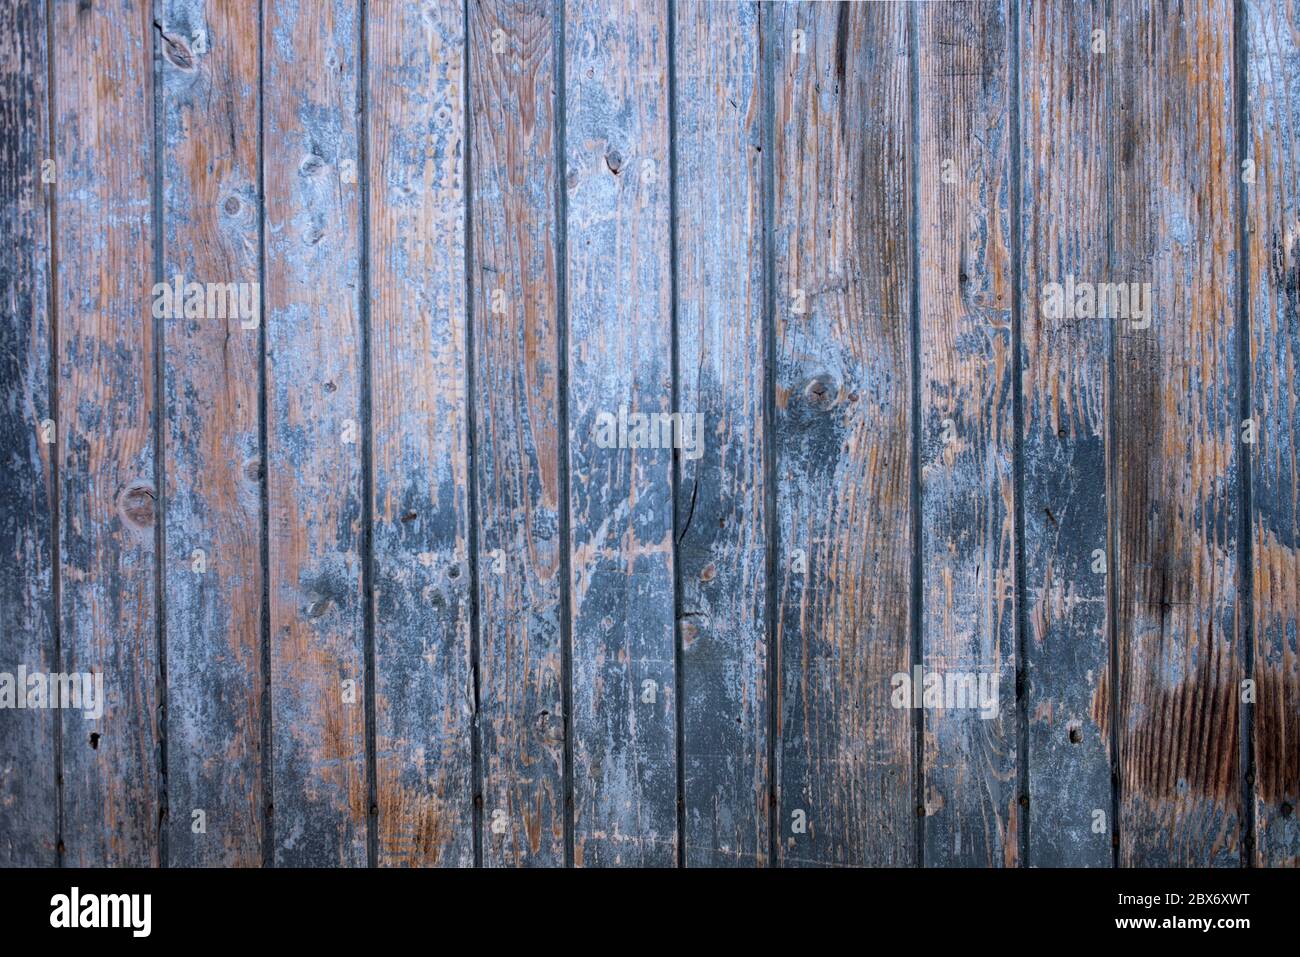 Background of Old blue wooden wall, wood texture, grunge wood panels. Stock Photo